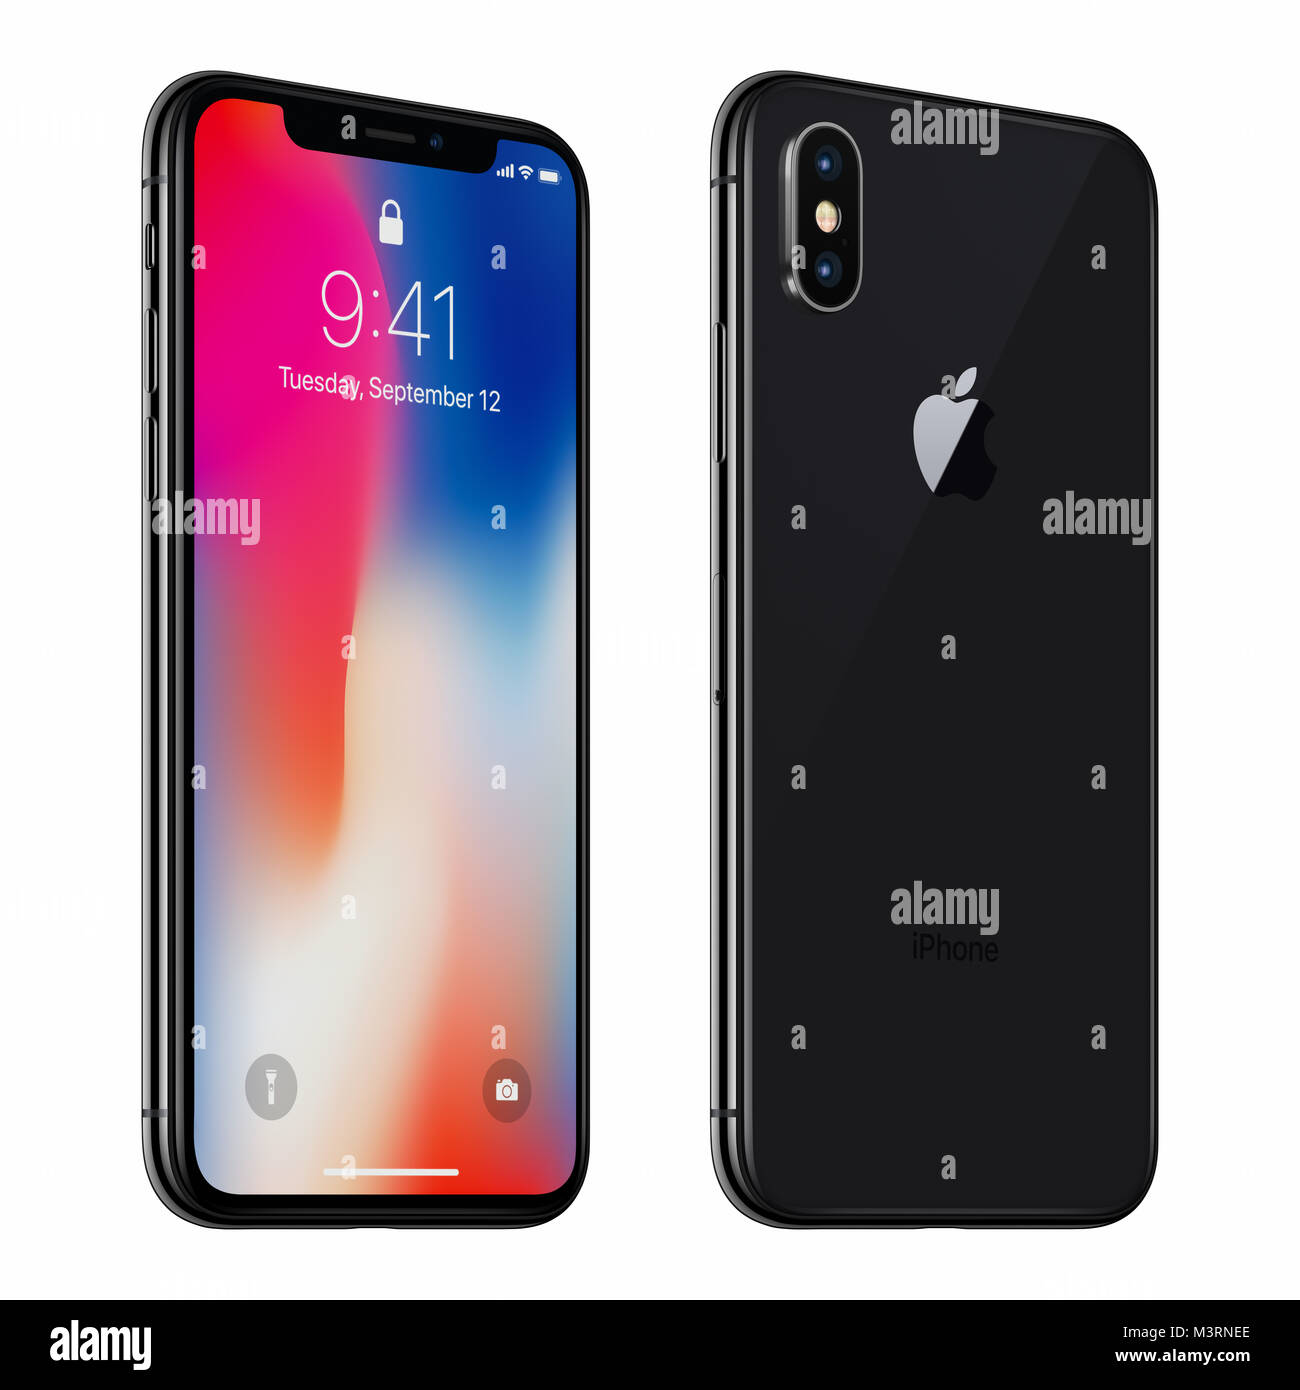 Black rotated Apple iPhone X with iOS 11 lockscreen front side and back side isolated on white background. Stock Photo